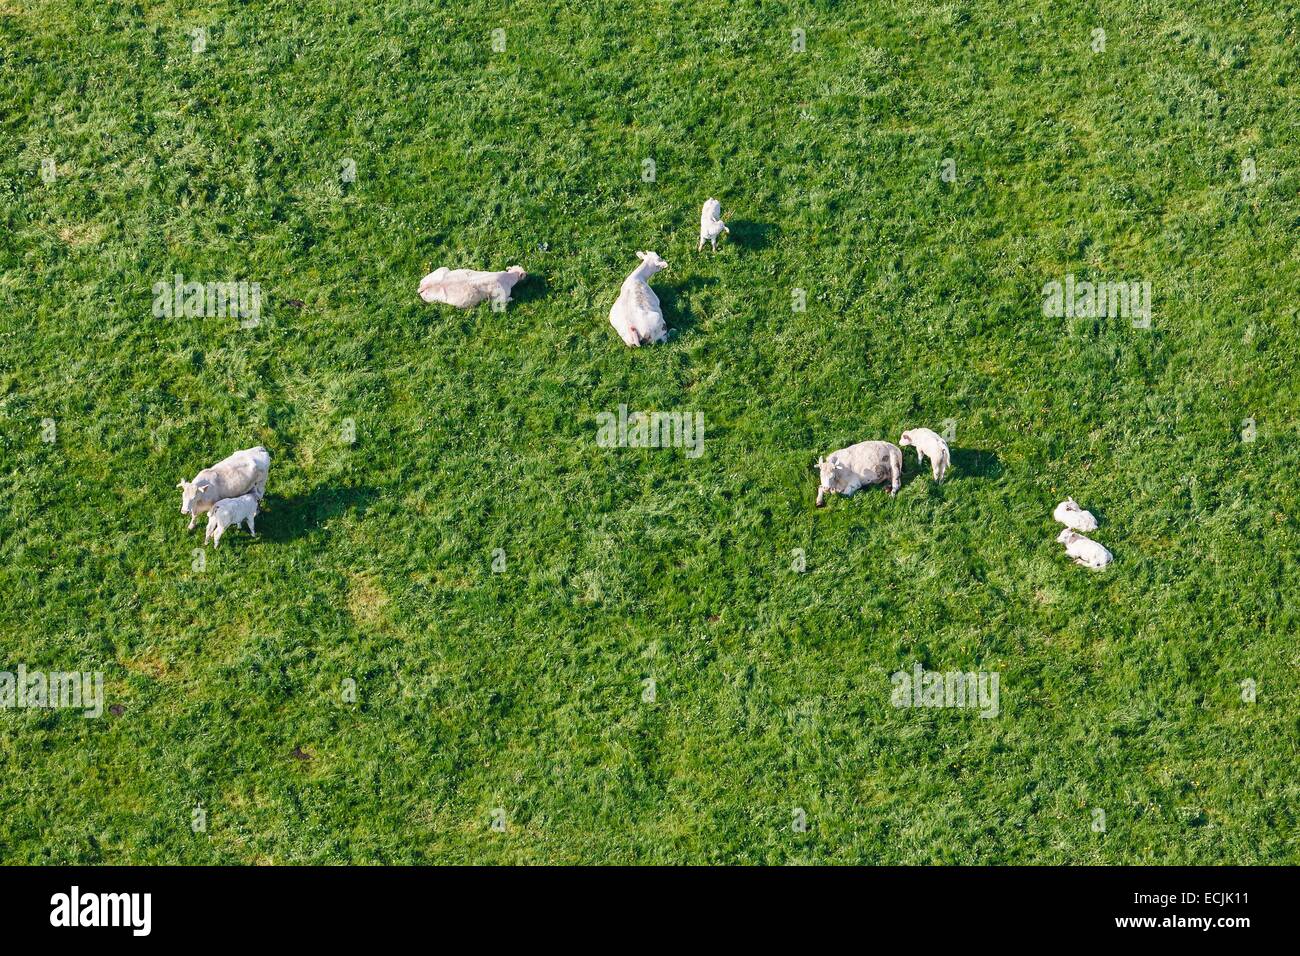 France, Vendee, La Jonchere, cows and calves in a meadow (aerial view) Stock Photo